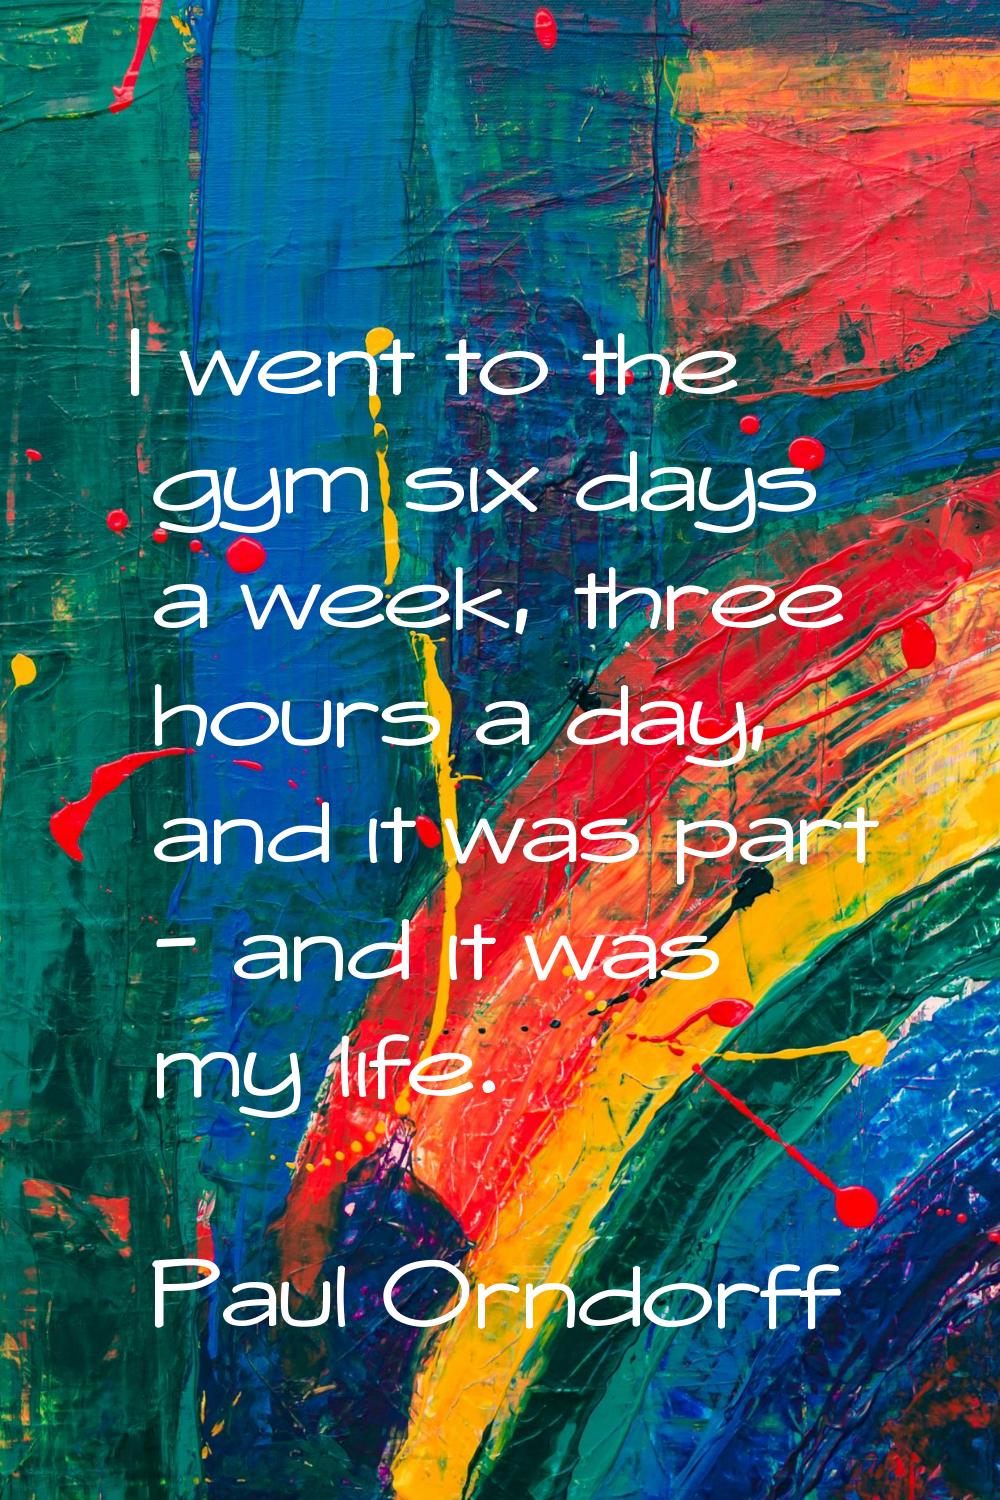 I went to the gym six days a week, three hours a day, and it was part - and it was my life.